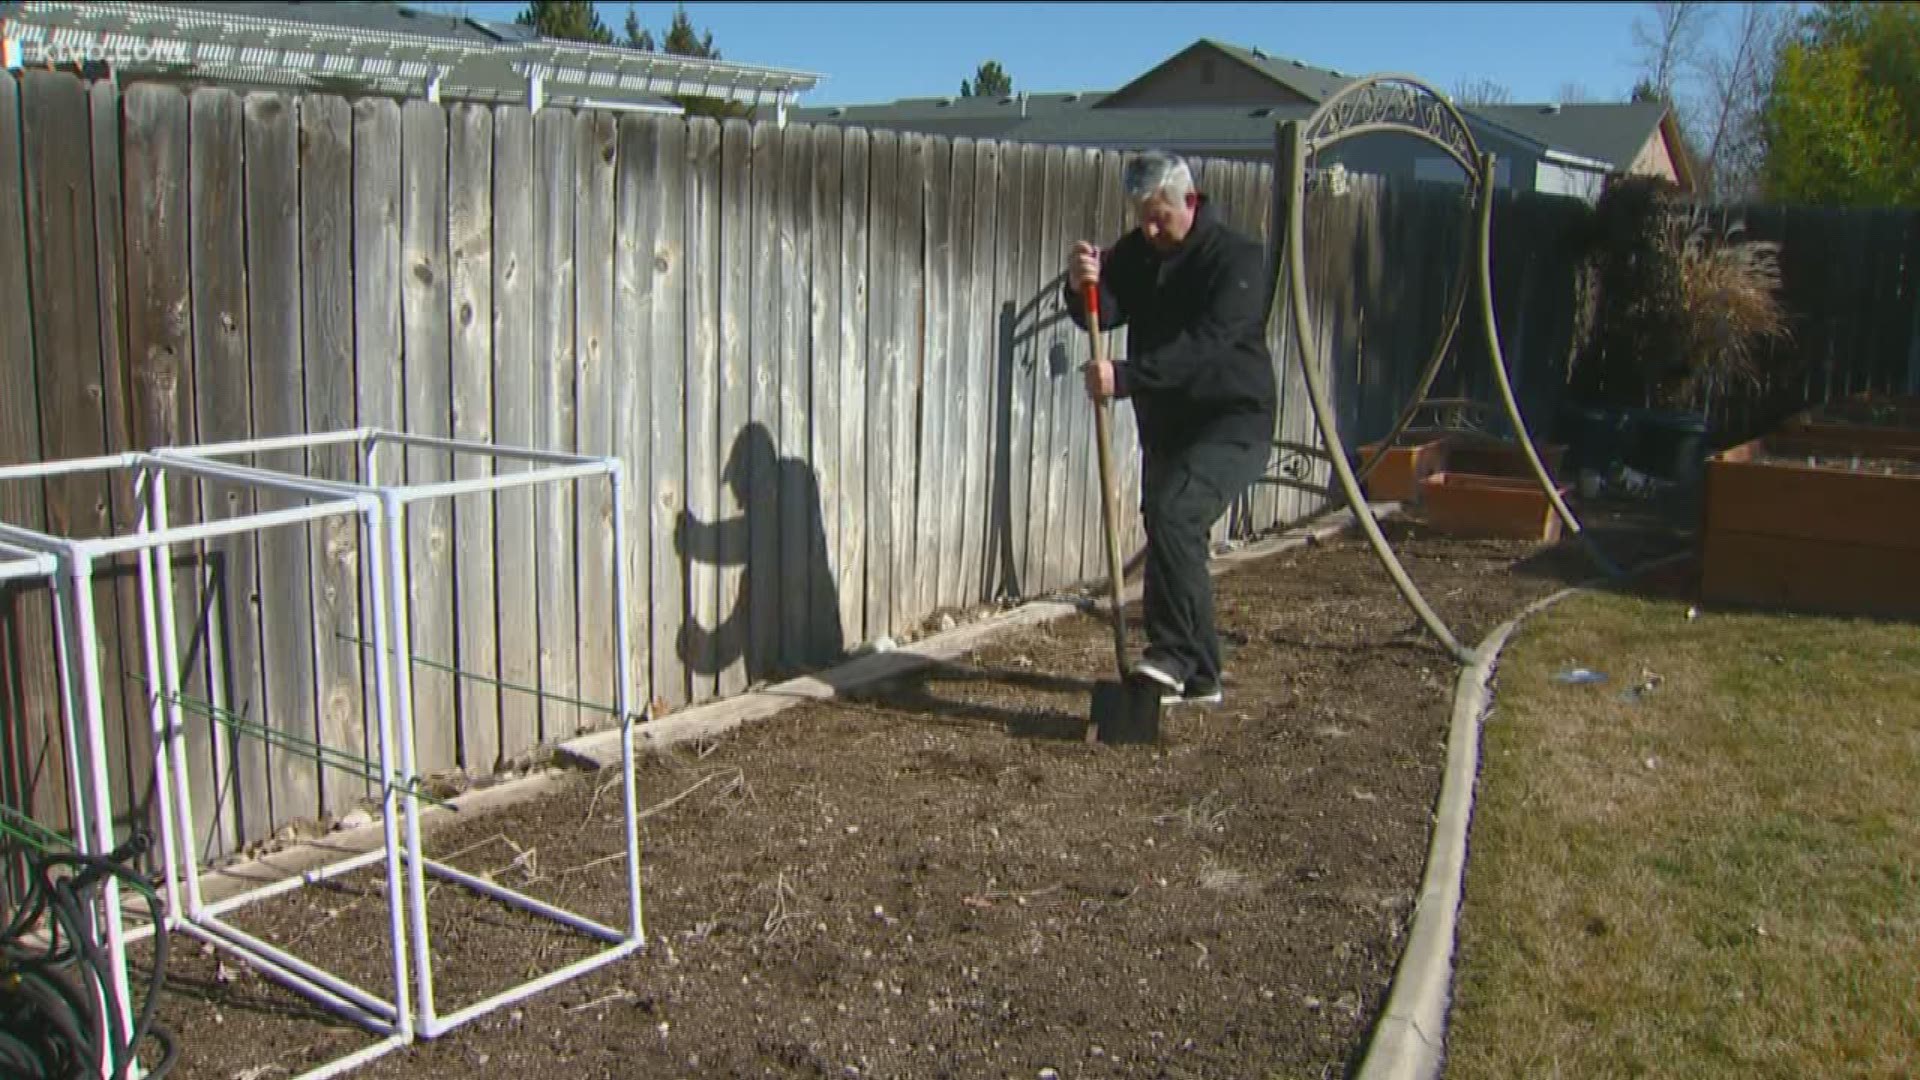 Garden Master Jim Duthie shows us how to get a jump start on spring gardening chores before the big rush when spring finally arrives.